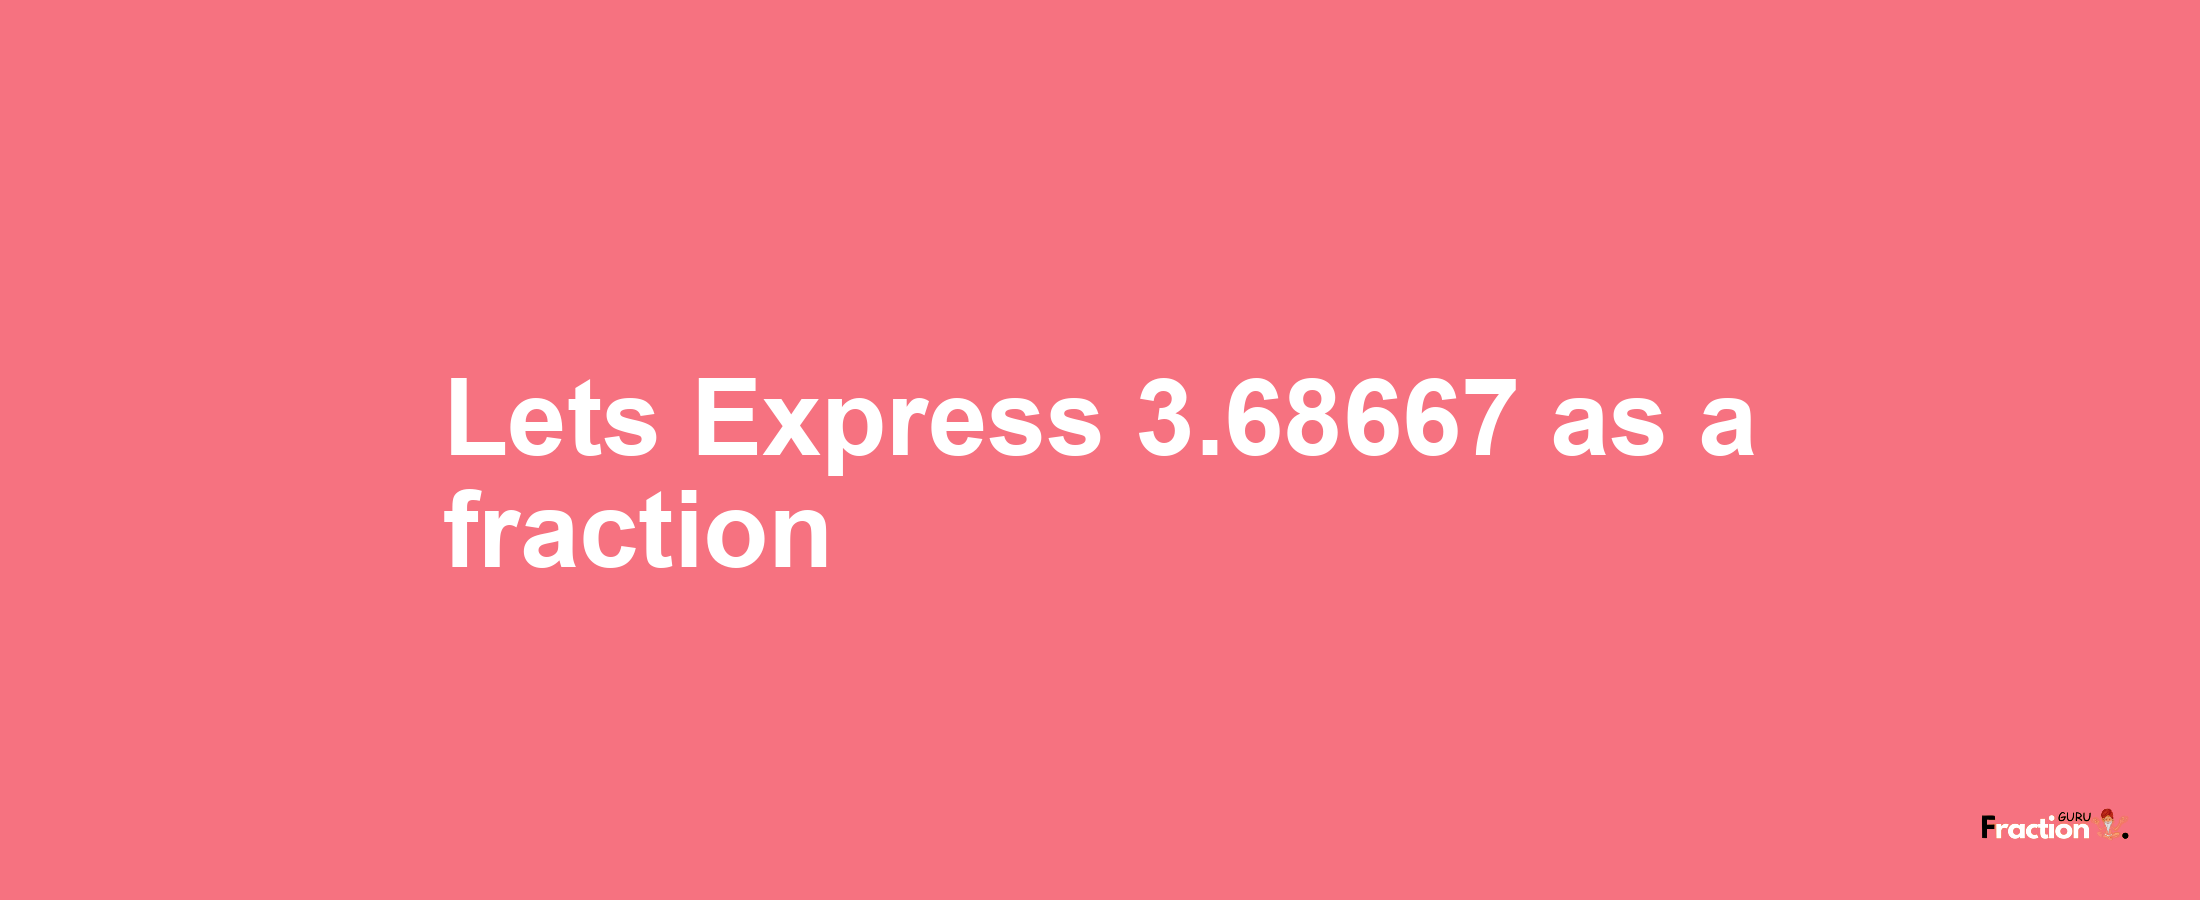 Lets Express 3.68667 as afraction